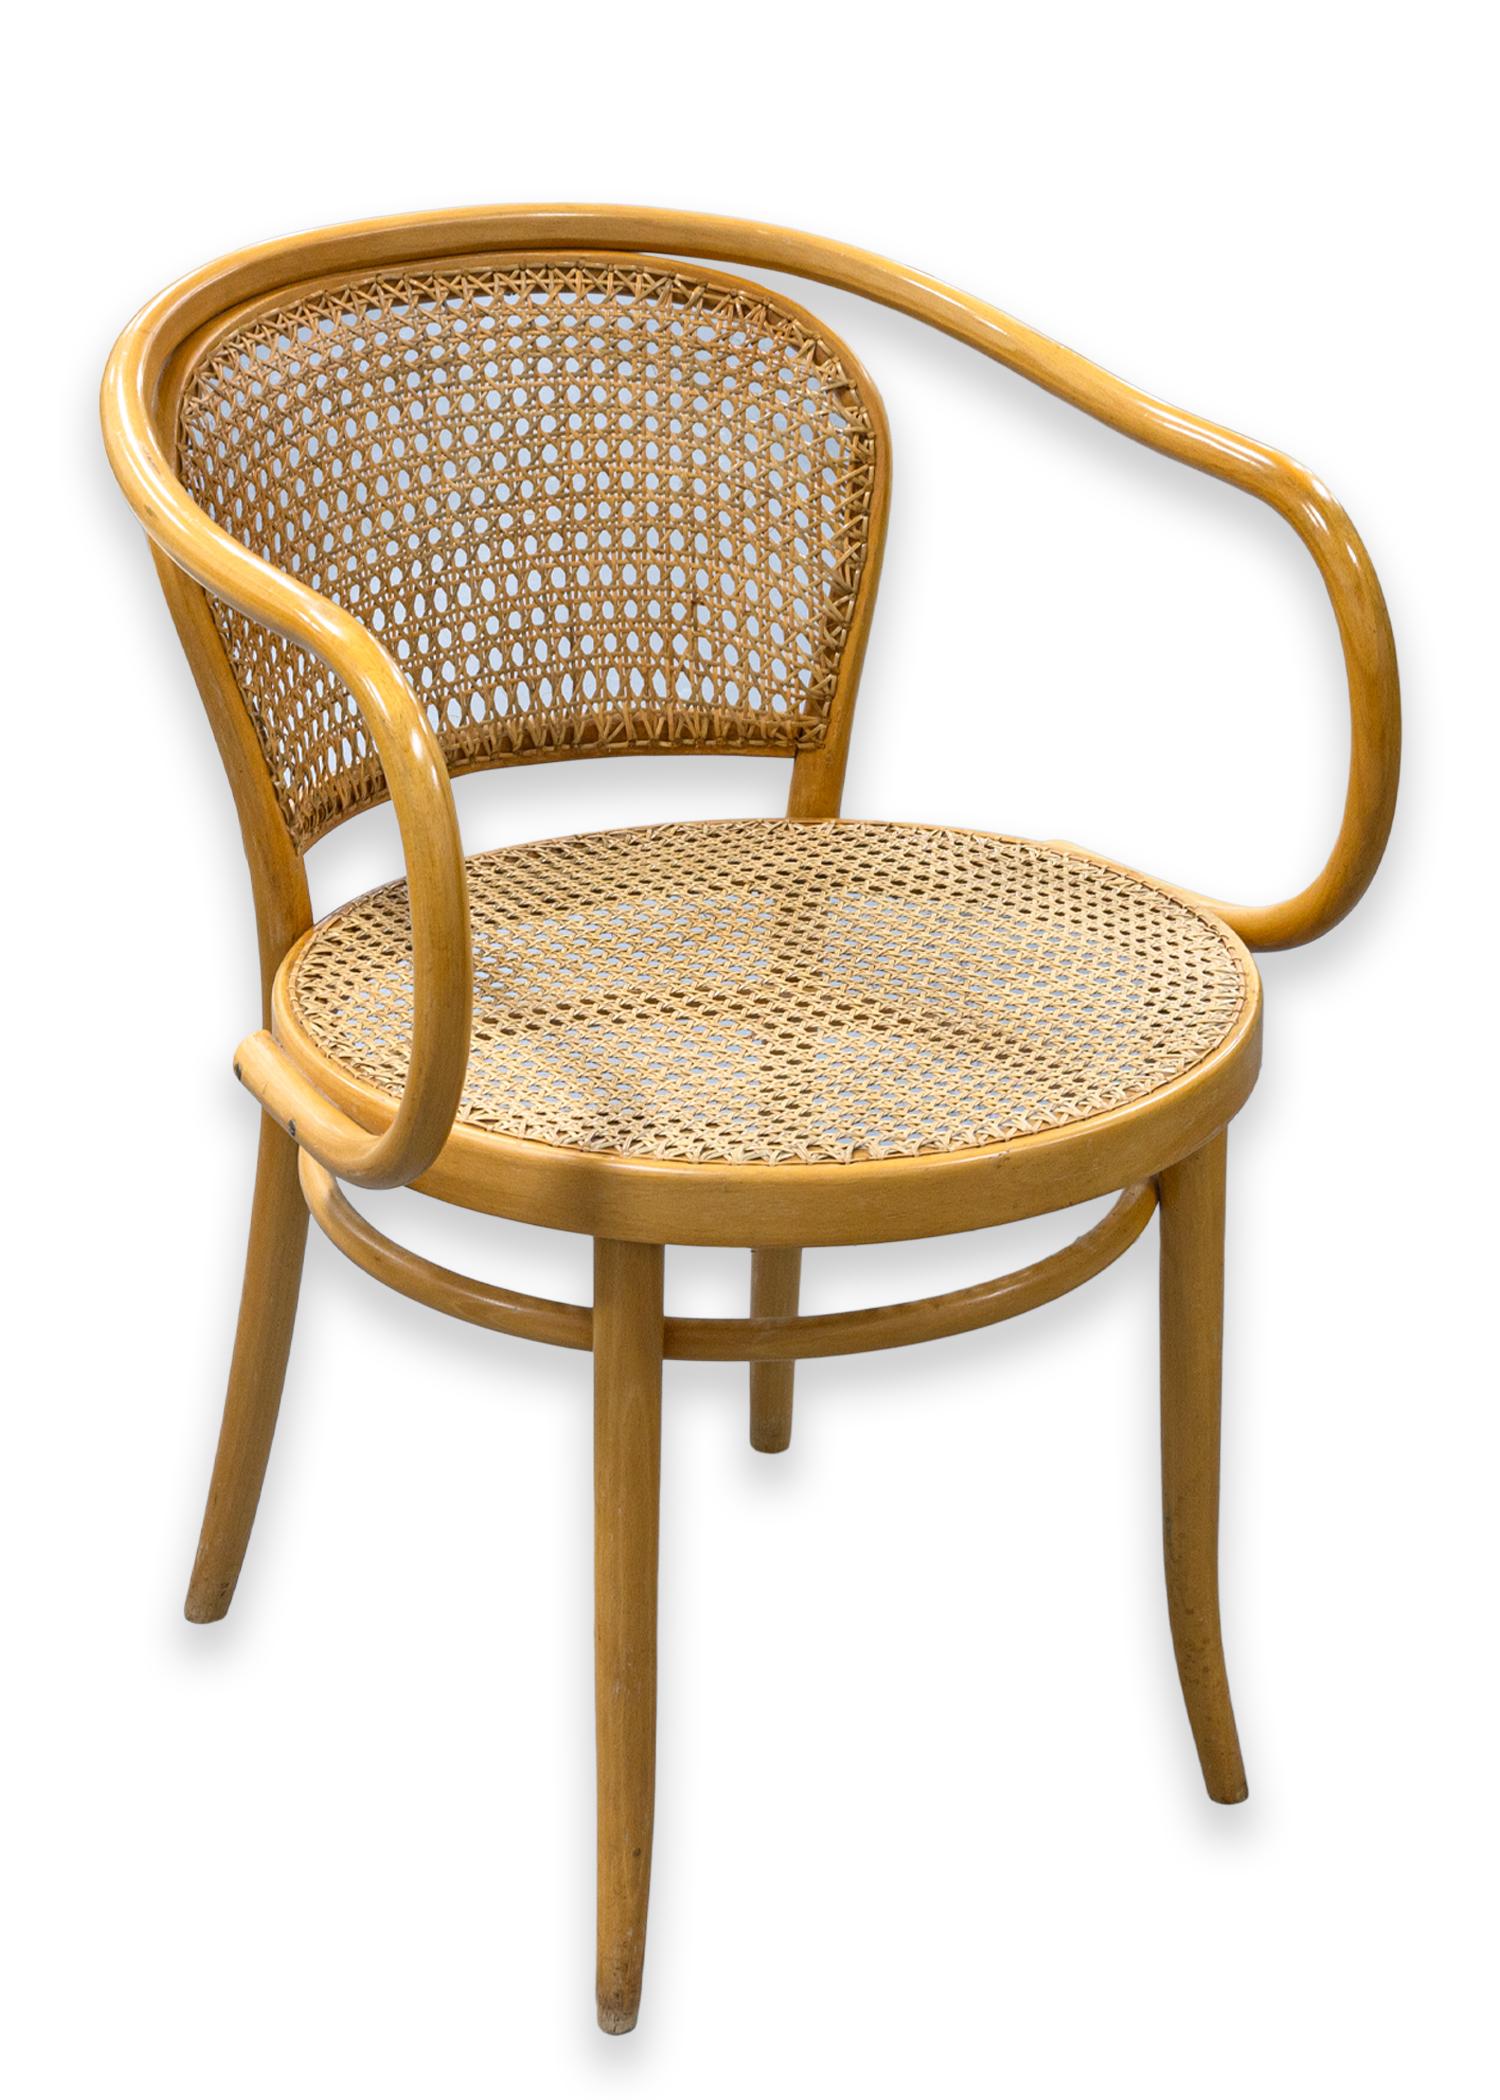 A set of 6 Stendig armchairs. A lovely set of mid century modern dining chairs featuring a beechwood construction with rounded arms, and a rattan seat and backing. These chairs are in very good vintage condition. The rattan seats and backings look